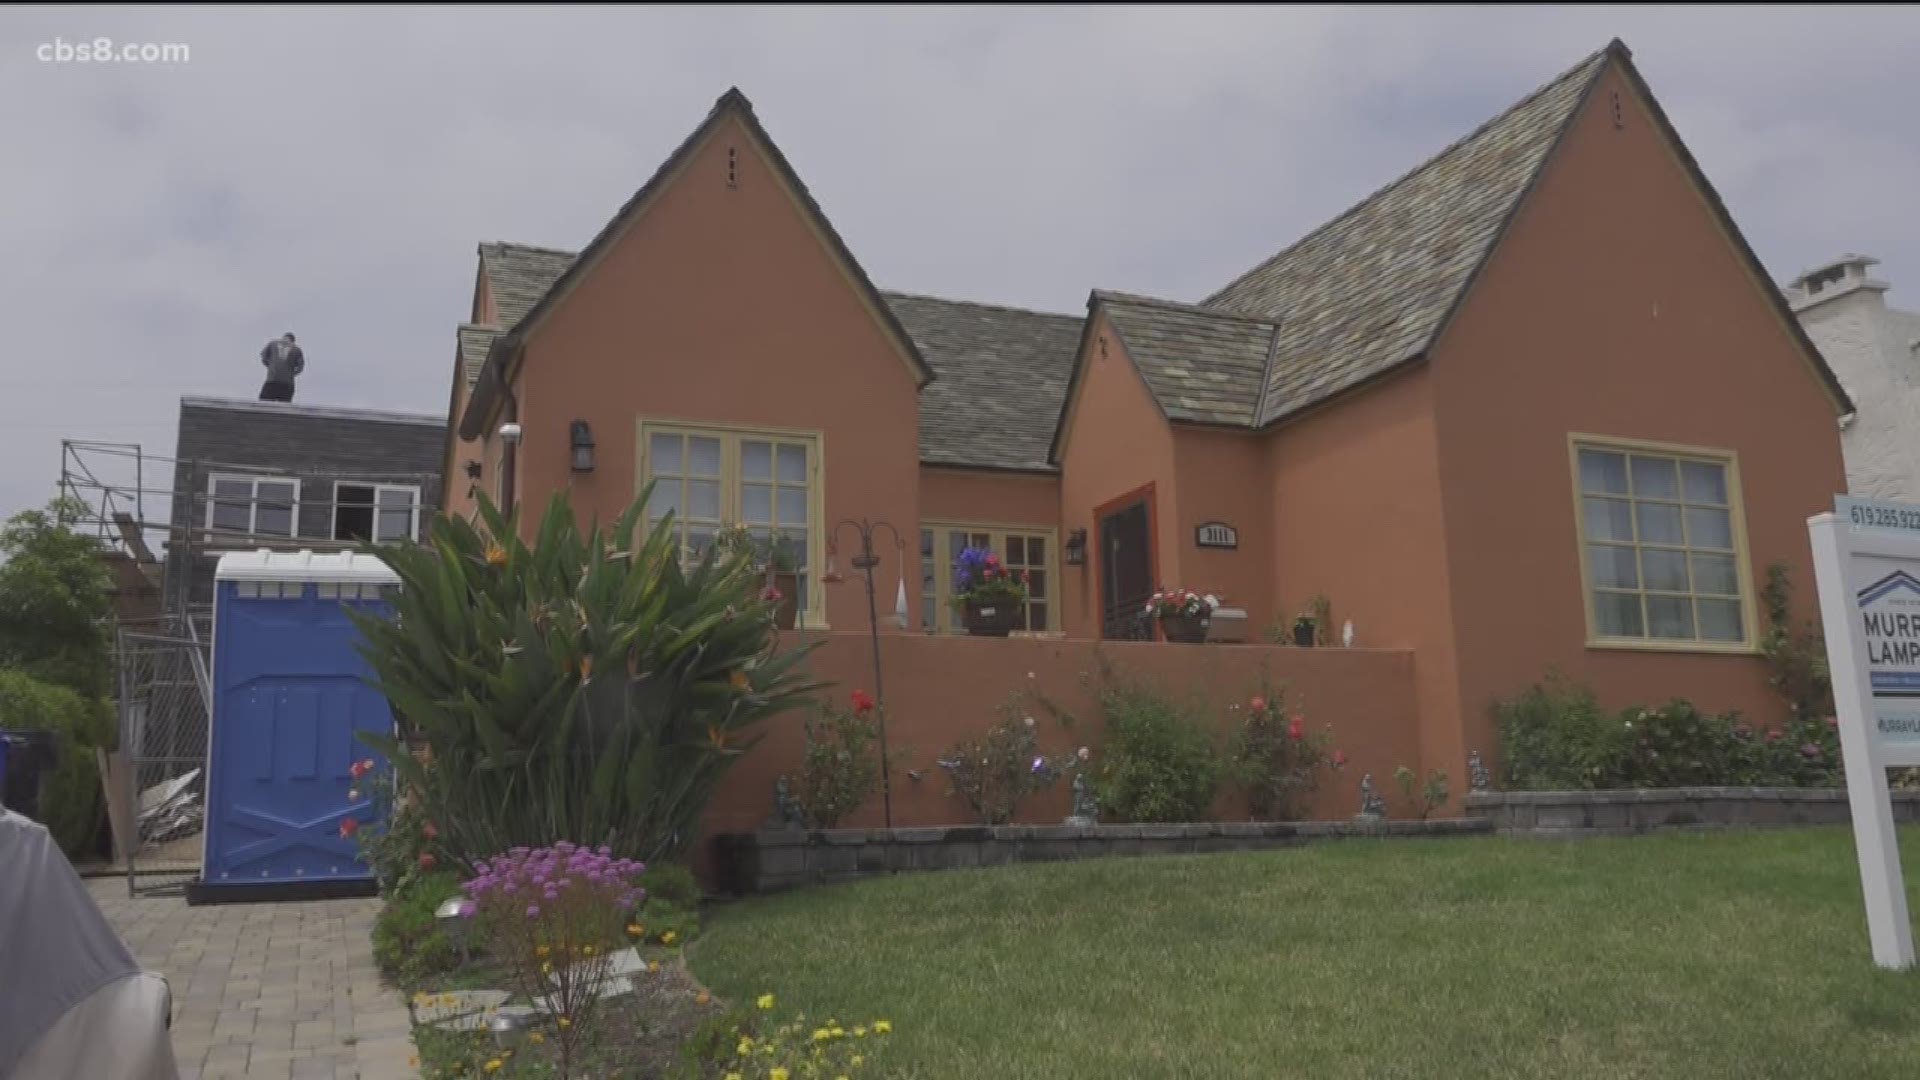 The City of San Diego is trying to find new ways to combat the ongoing housing crisis as high prices and small inventories make it harder and harder. One idea is to make it easier for people to build secondary units on their property known as granny flats.